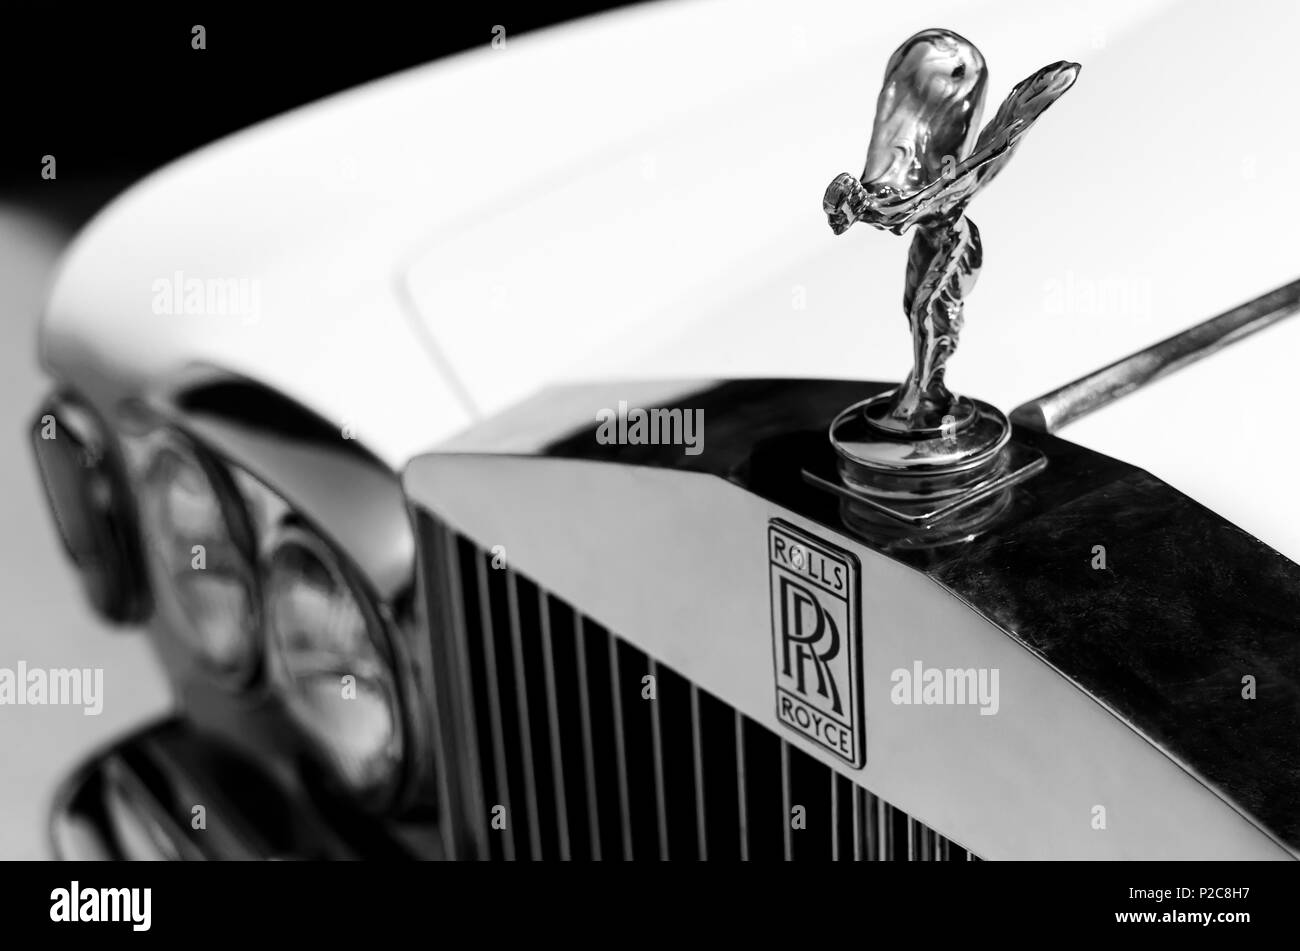 Heraklion, Crete / Greece. Close up view of the hood ornament 'Spirit of Ecstasy' and the logo of a vintage Rolls Royce car Stock Photo